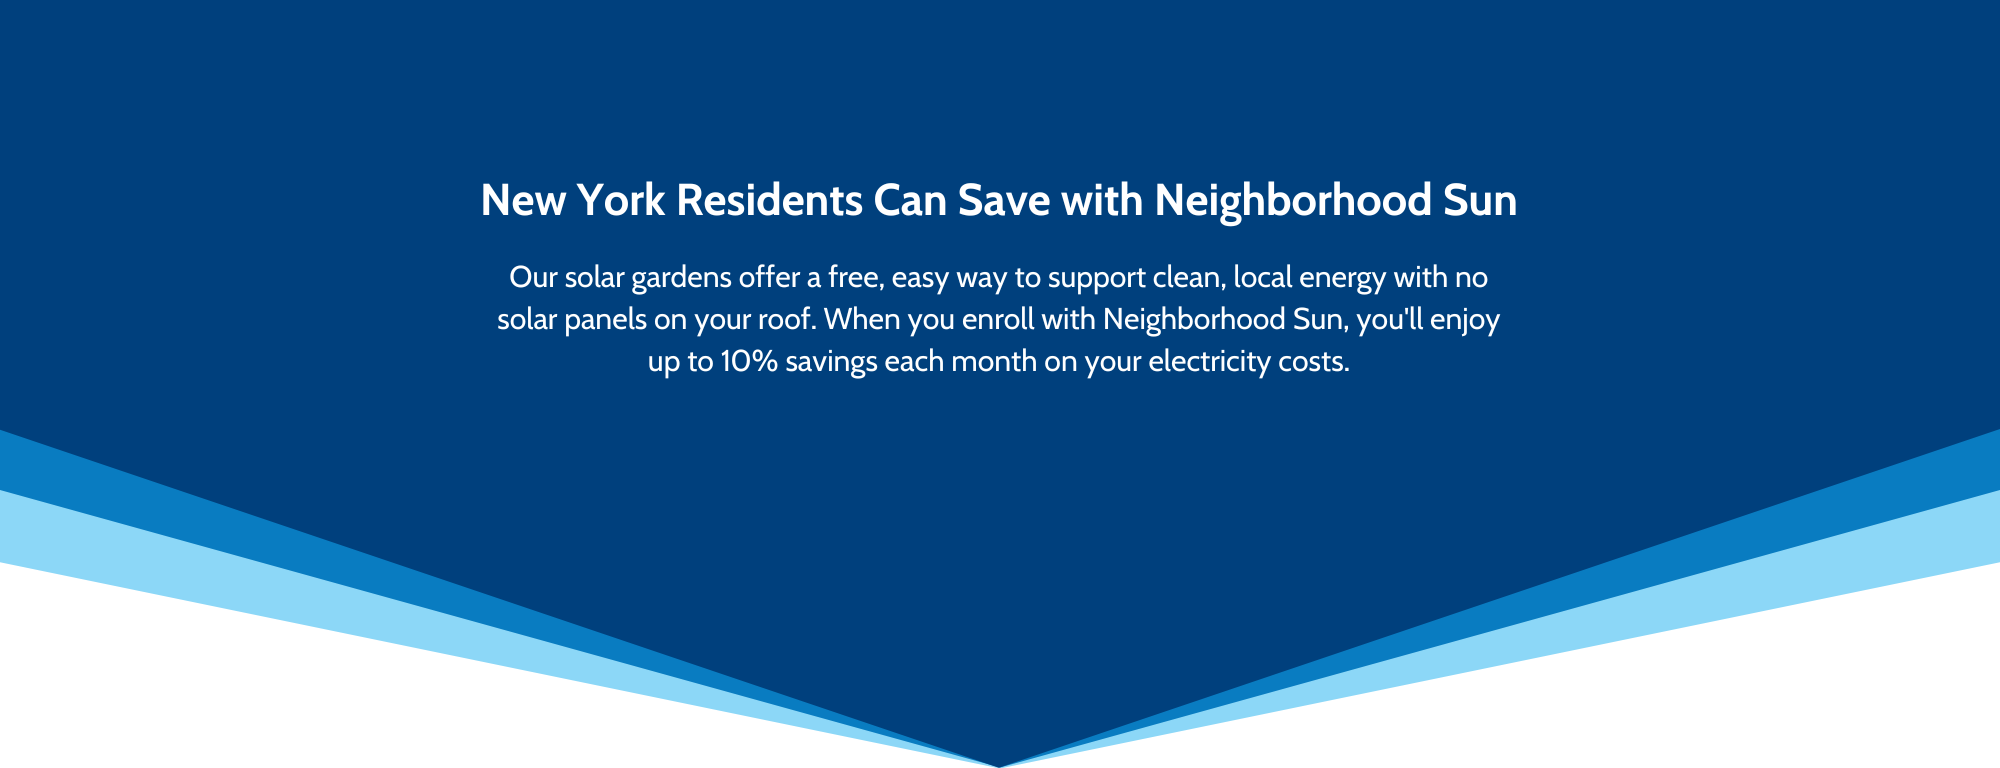 NY residents can save